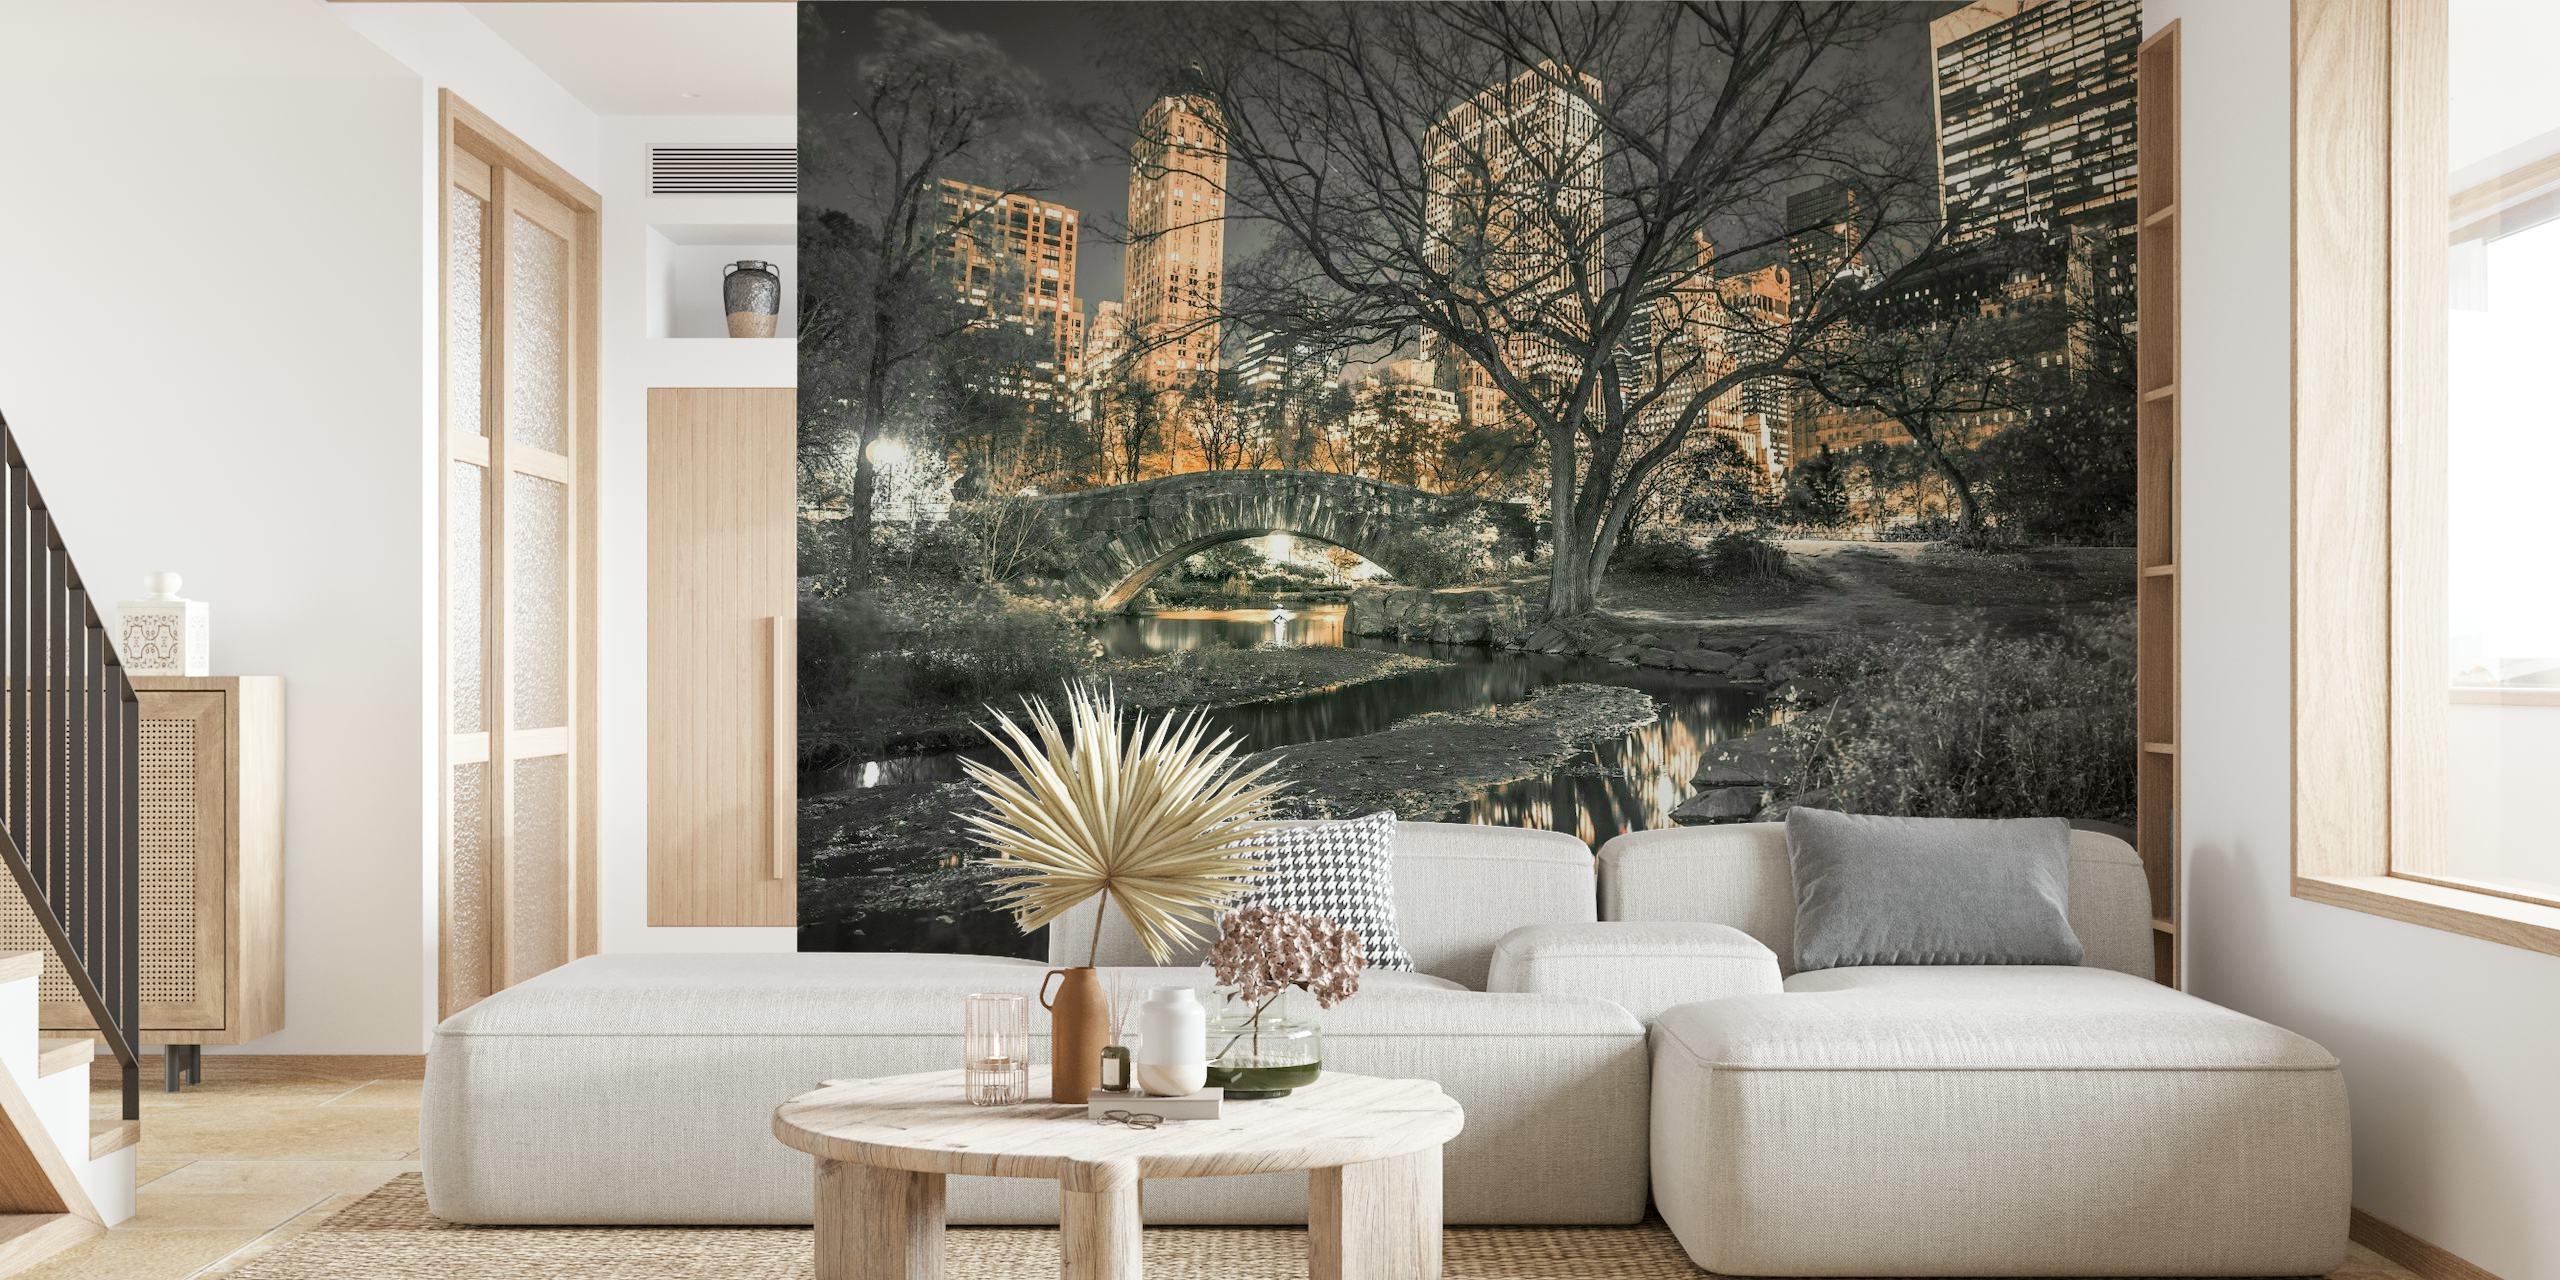 Central Park New York City wall mural